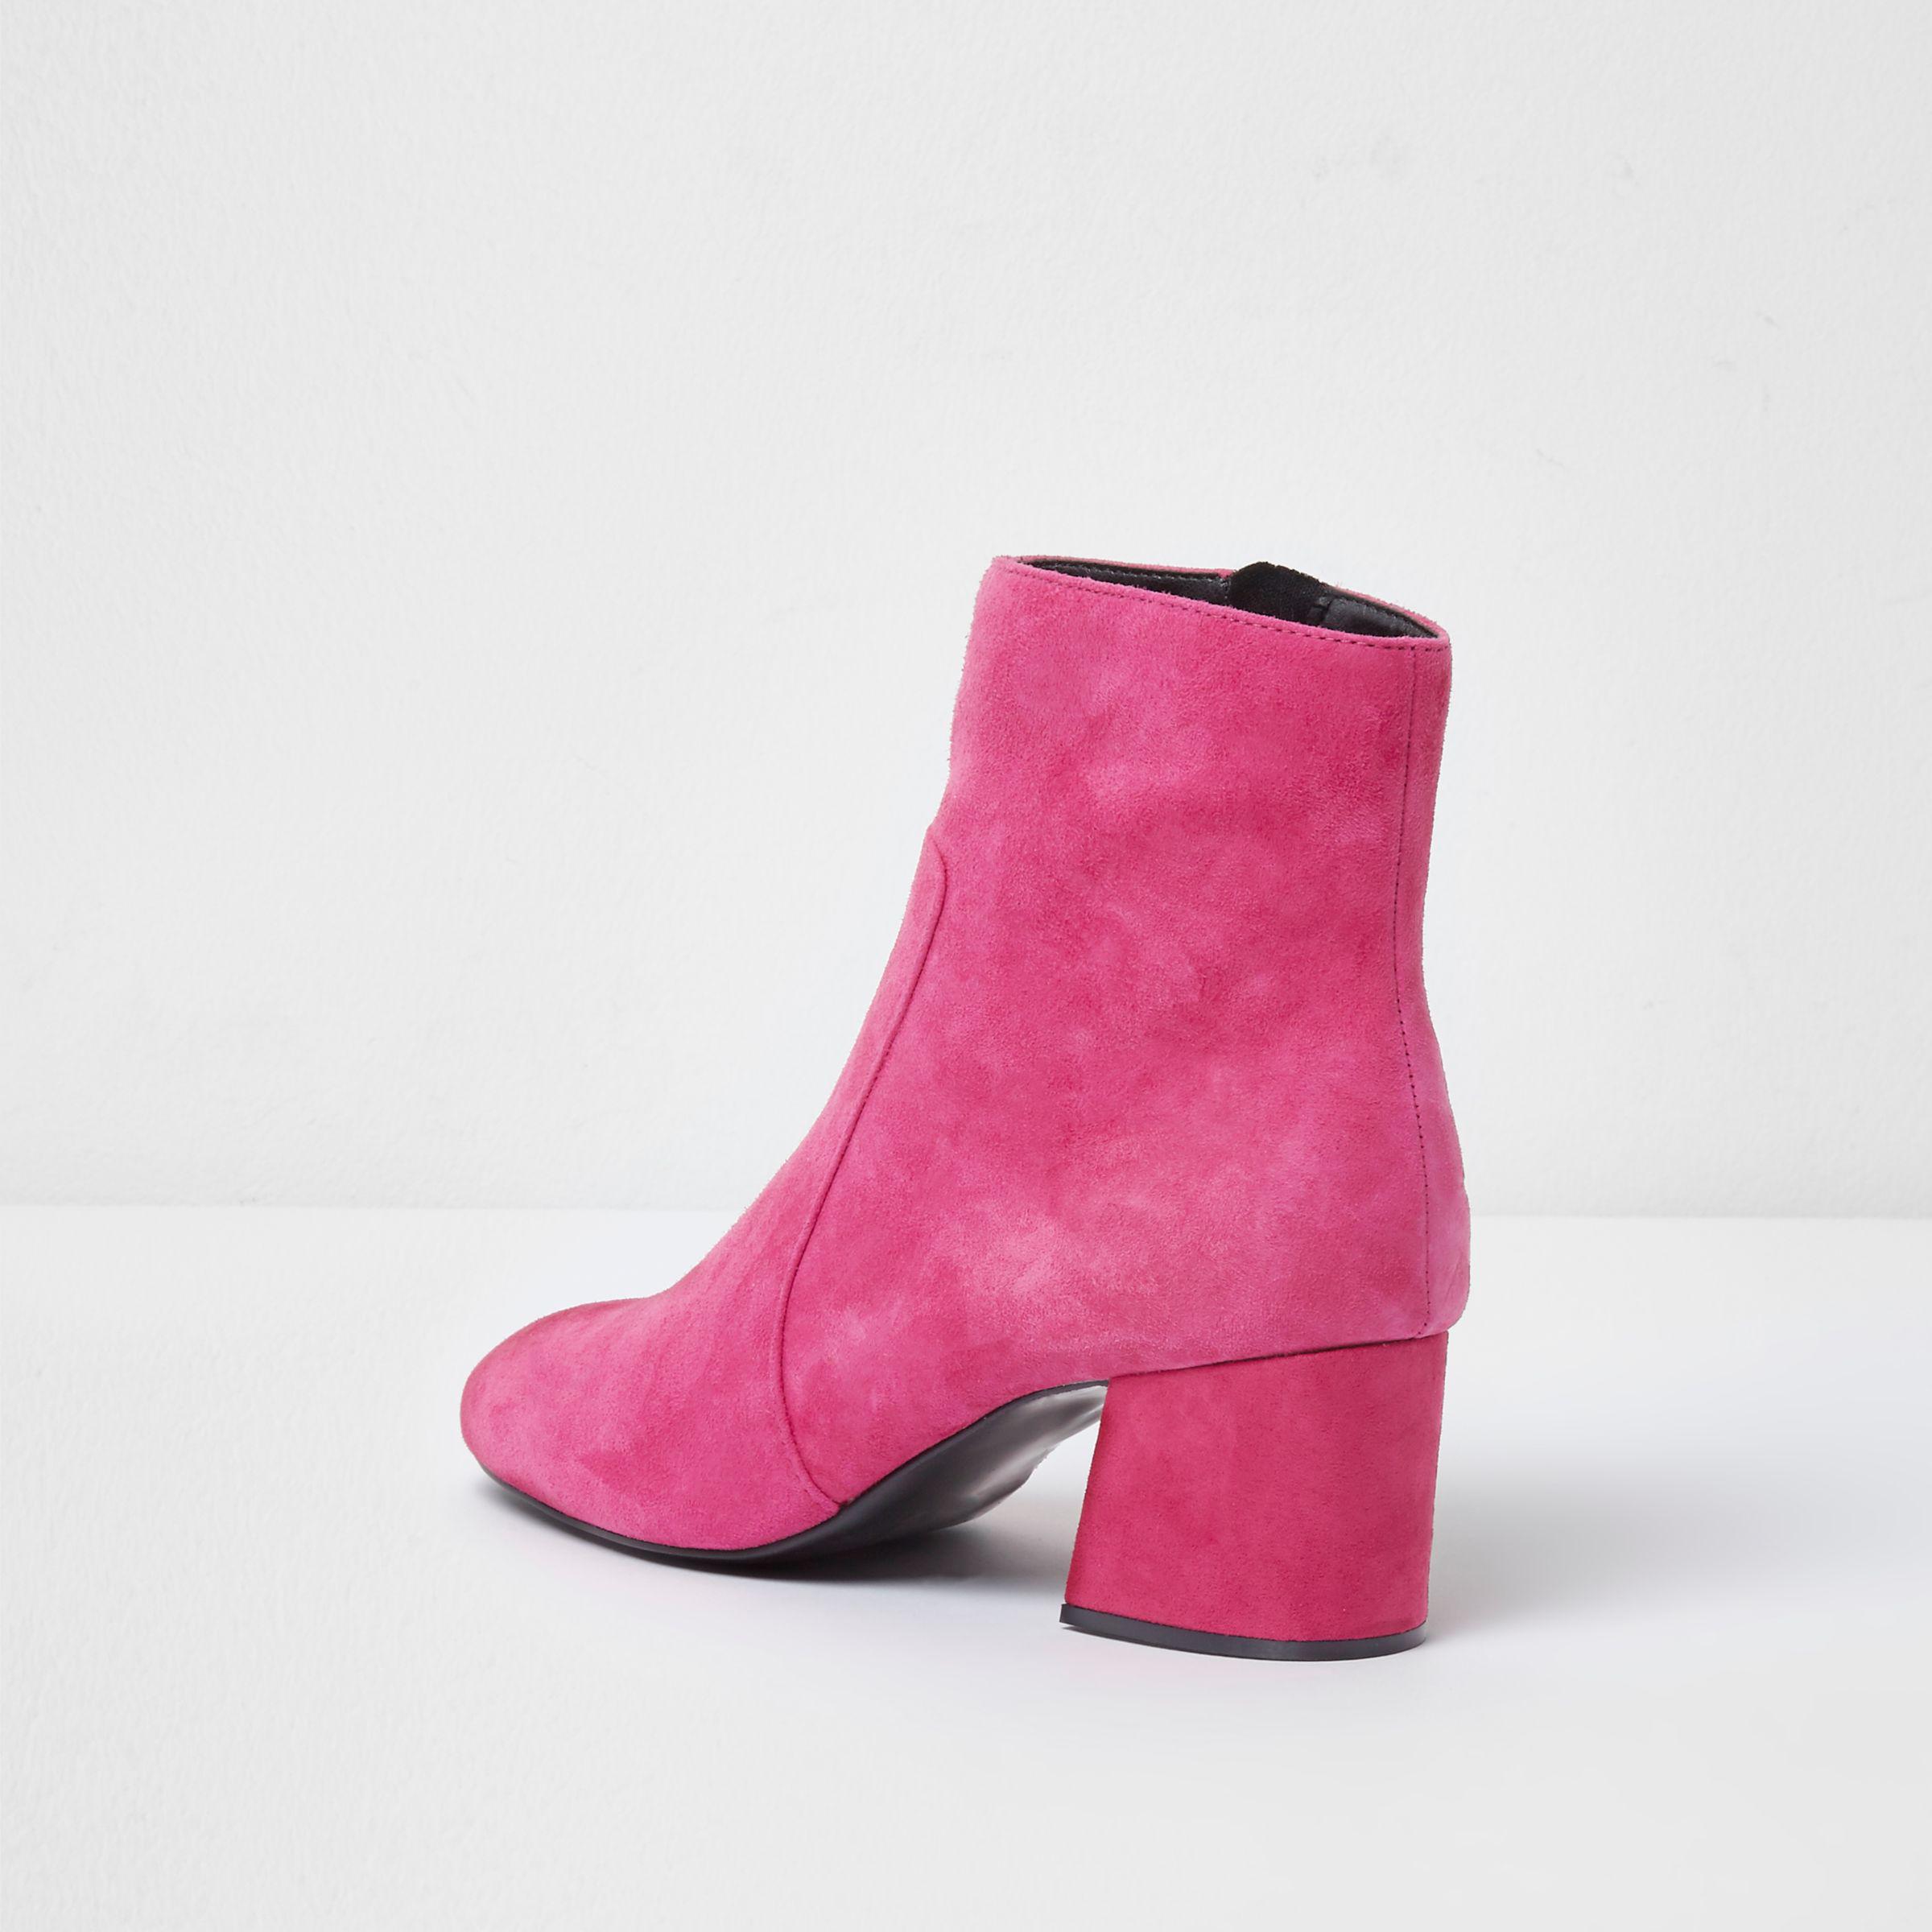 PINKY ~ STUDDED SUEDE PEEP-TOE ANKLE BOOT IN BLACK 